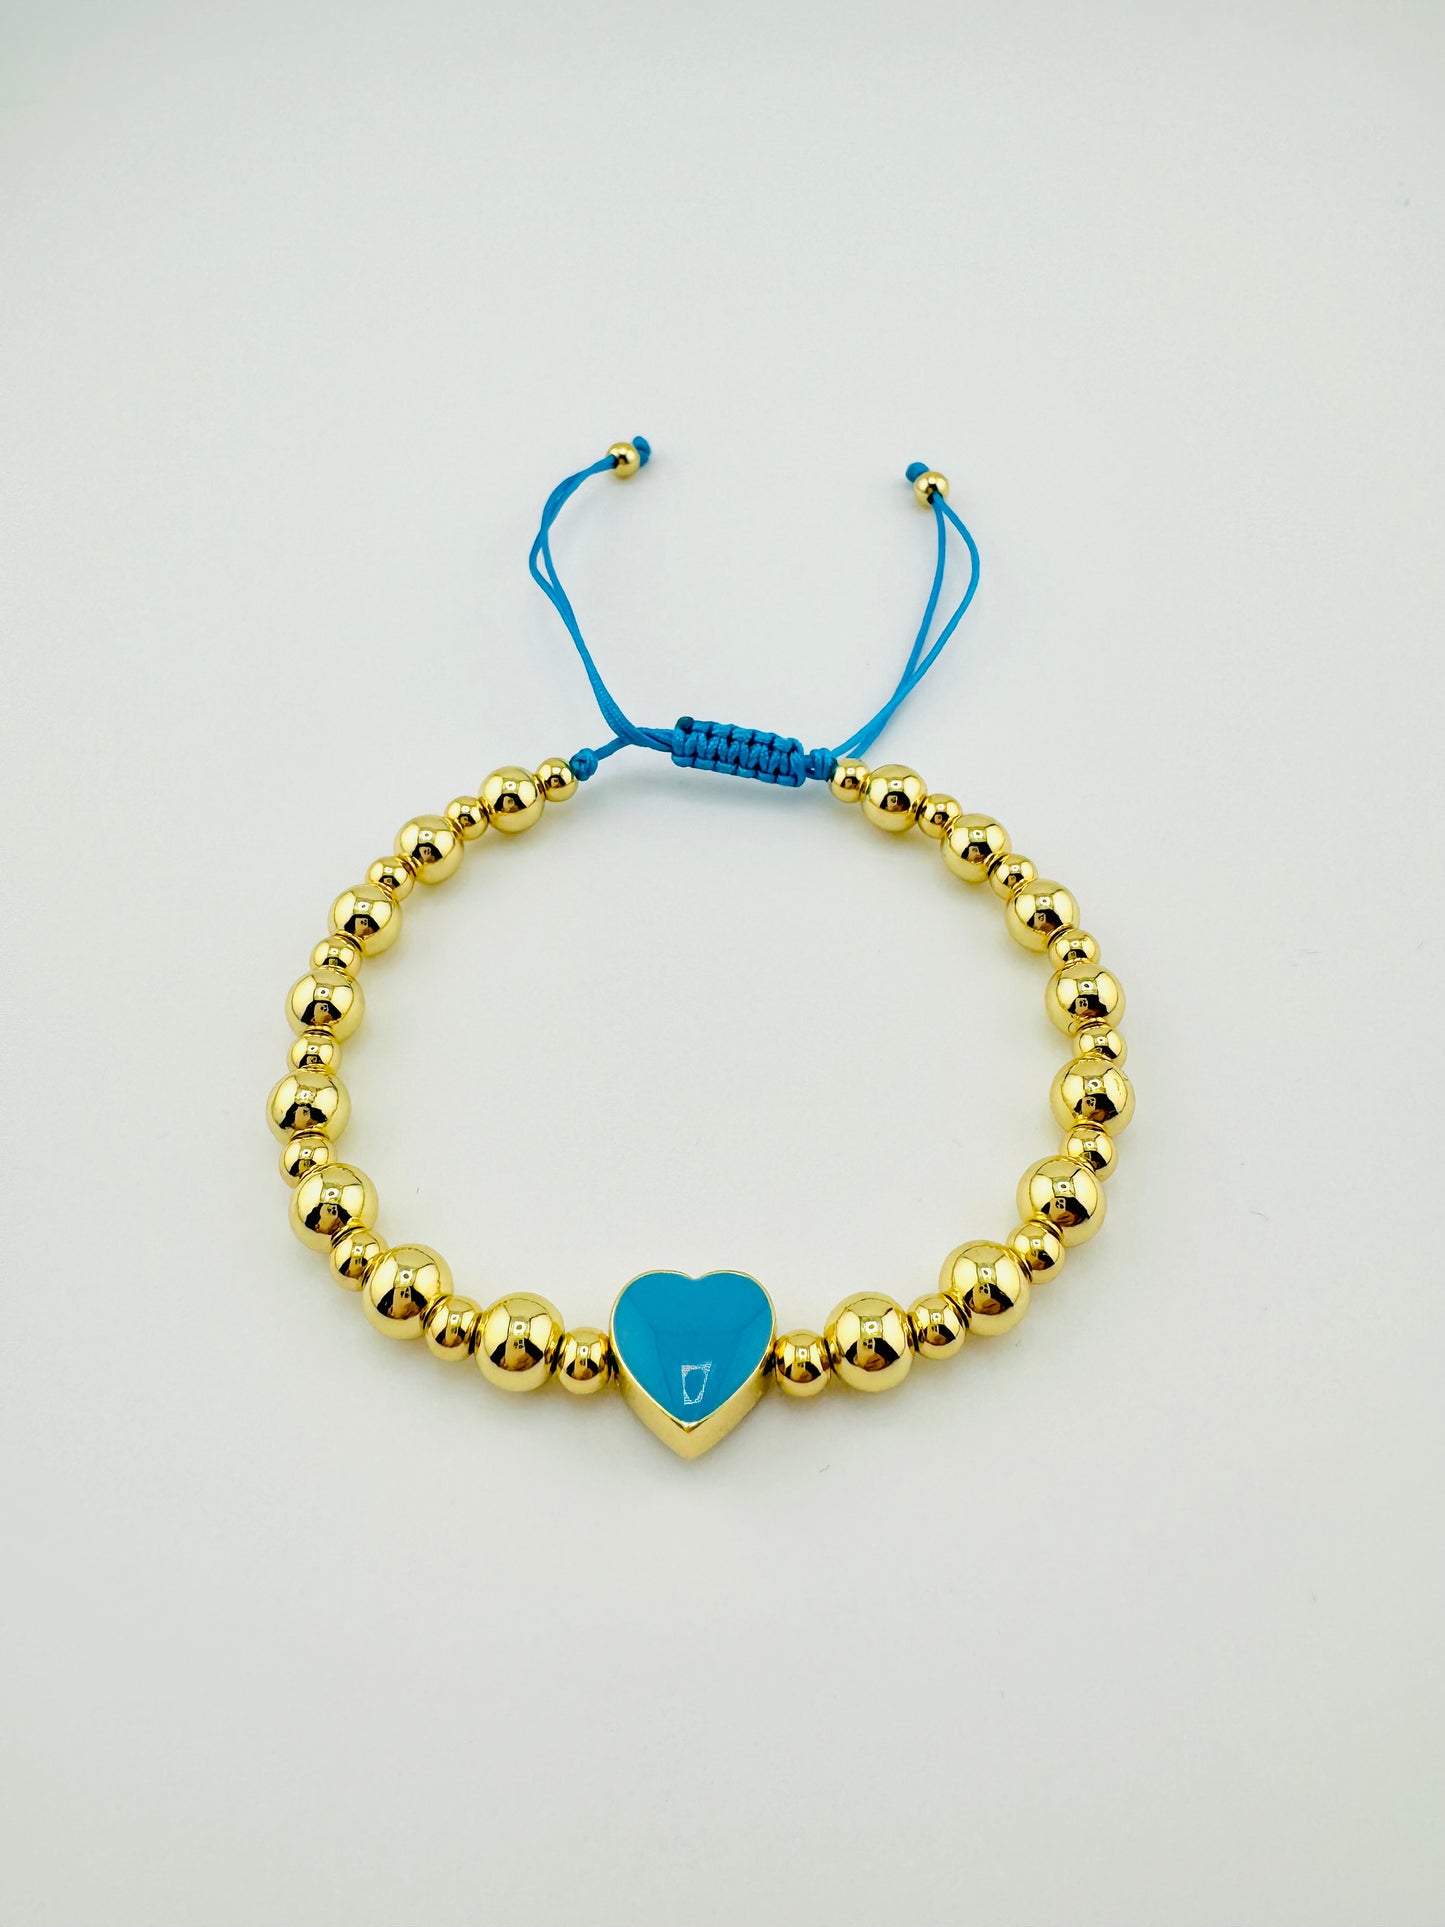 Julia gold filled bracelet with a turquoise heart